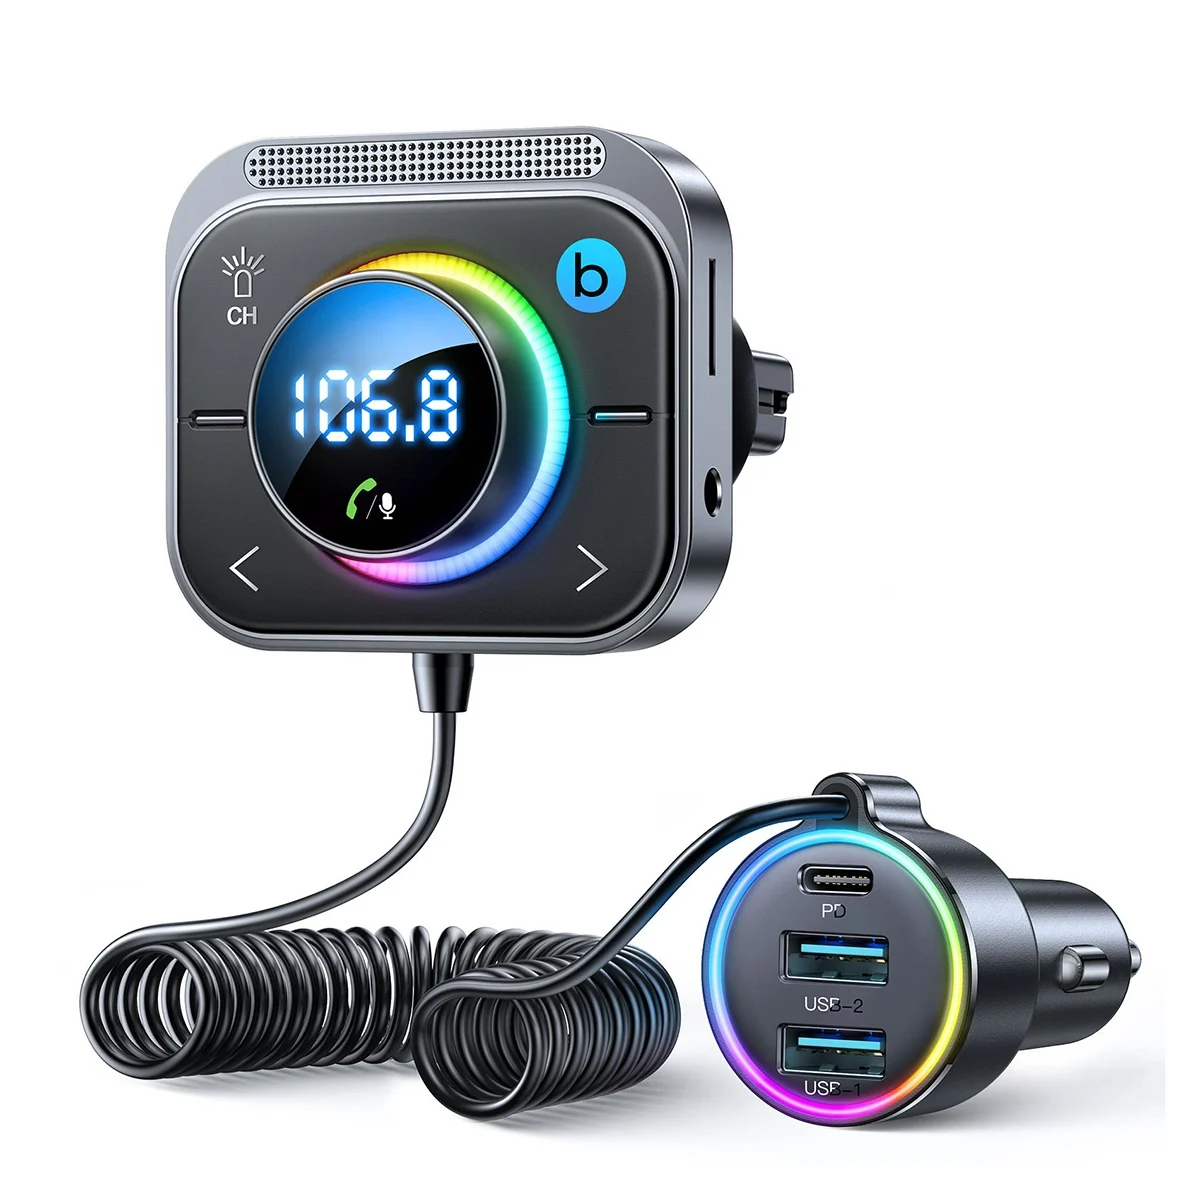 

Bluetooth FM Transmitter for Car,Deep Bass Sound, HIFI Stereo Car Charger Bluetooth Adapter with C Igarette Lighter Plug